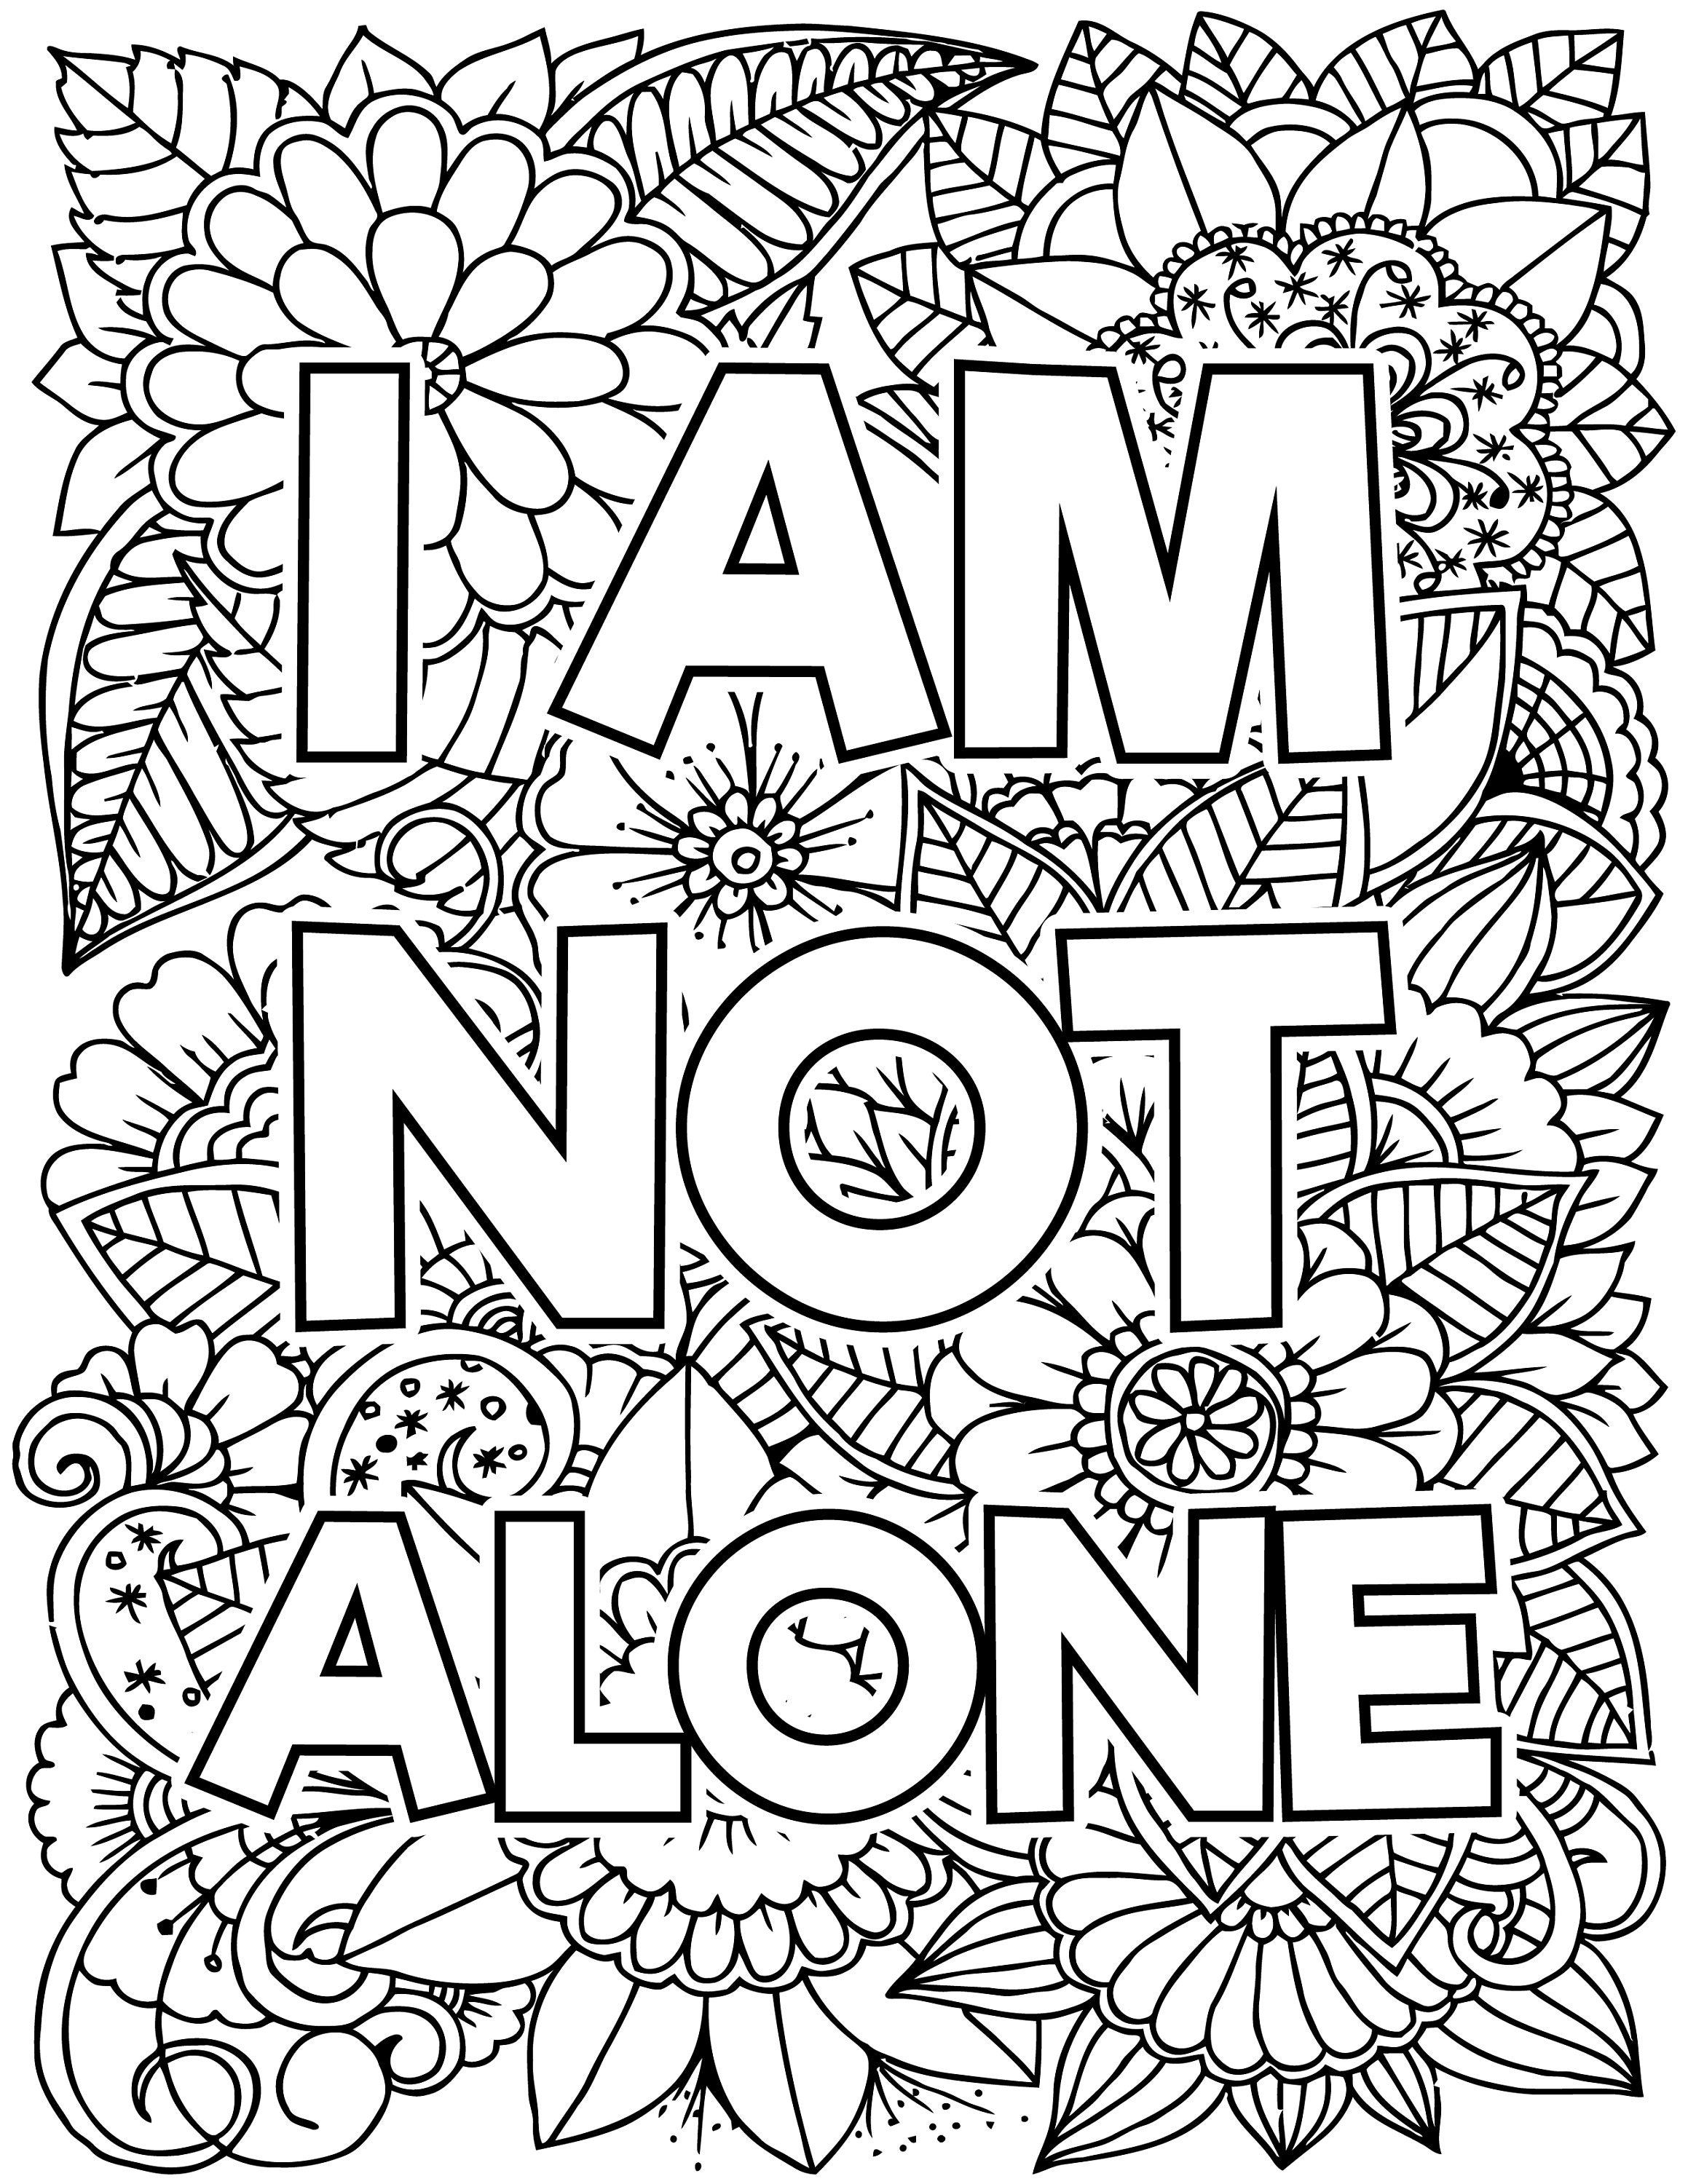 10 Mental Health AFFIRMATIONS Coloring Book Pages | Etsy